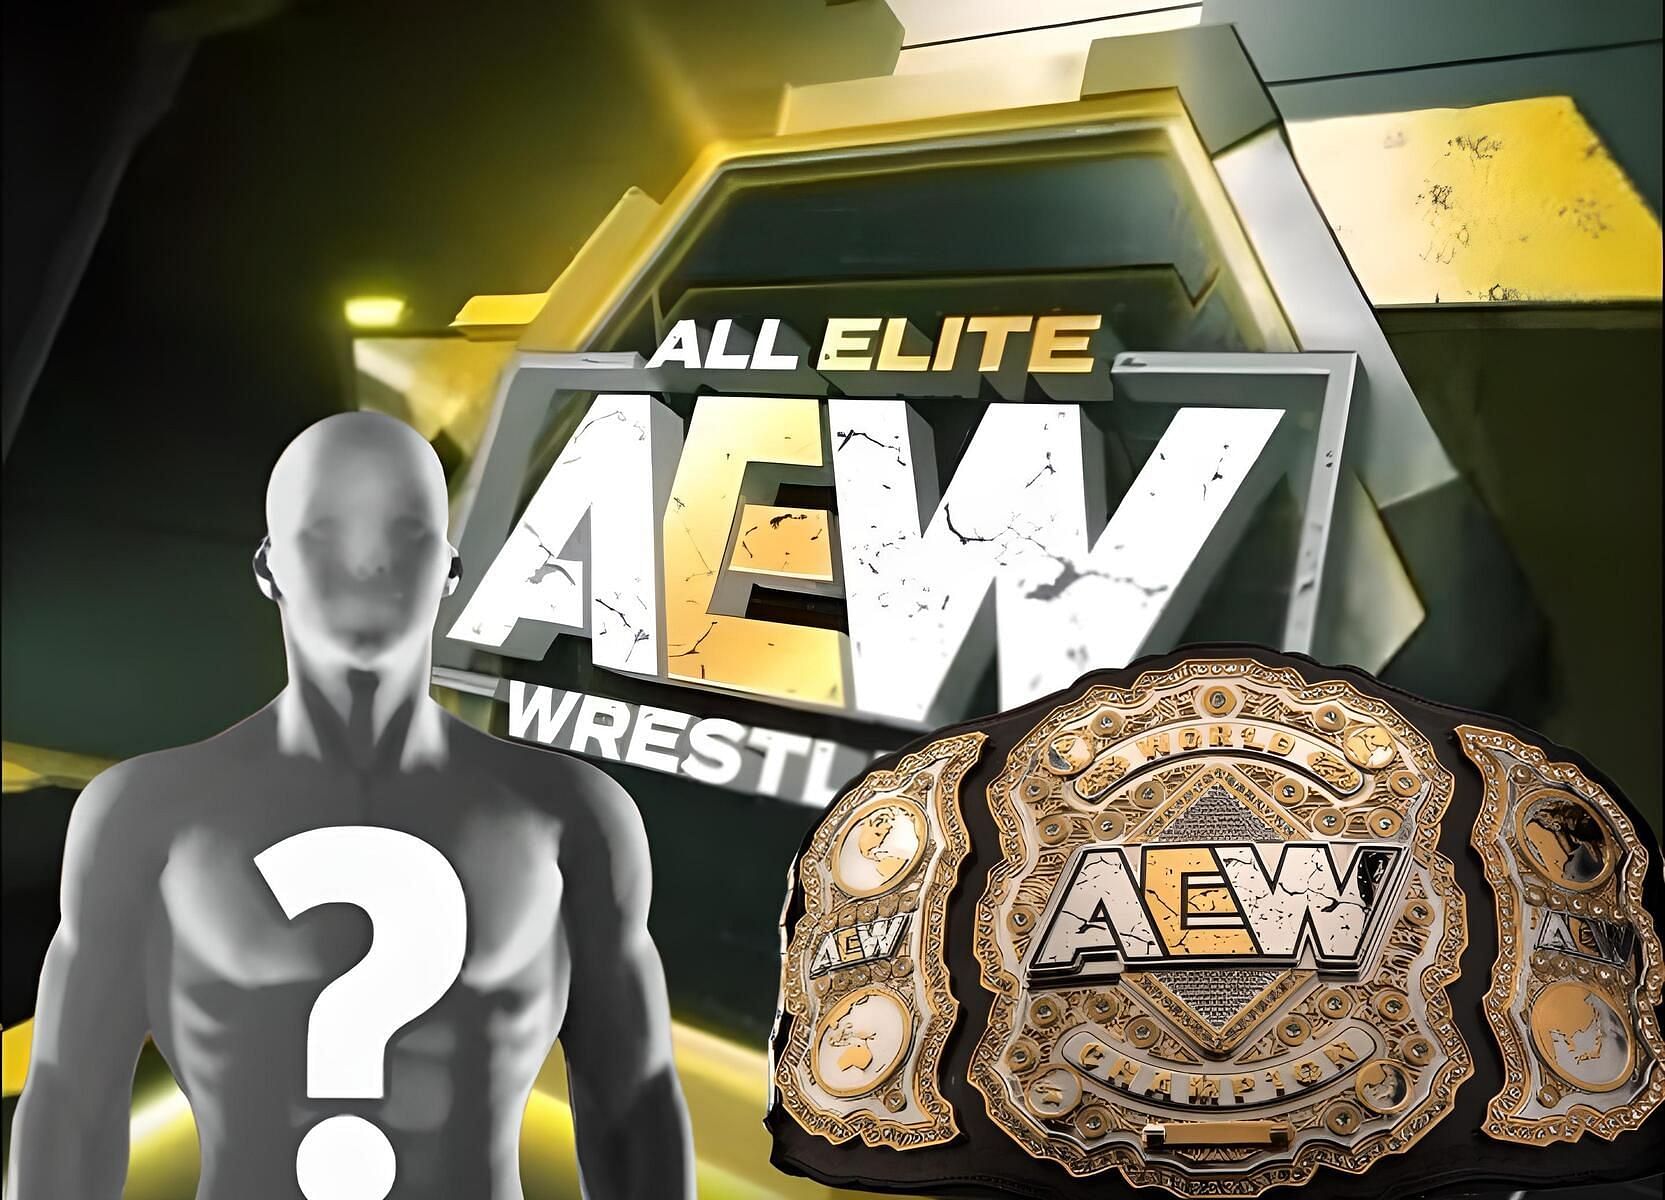 Mr. Mayhem claims to become All Elite Wrestling World Champion one day